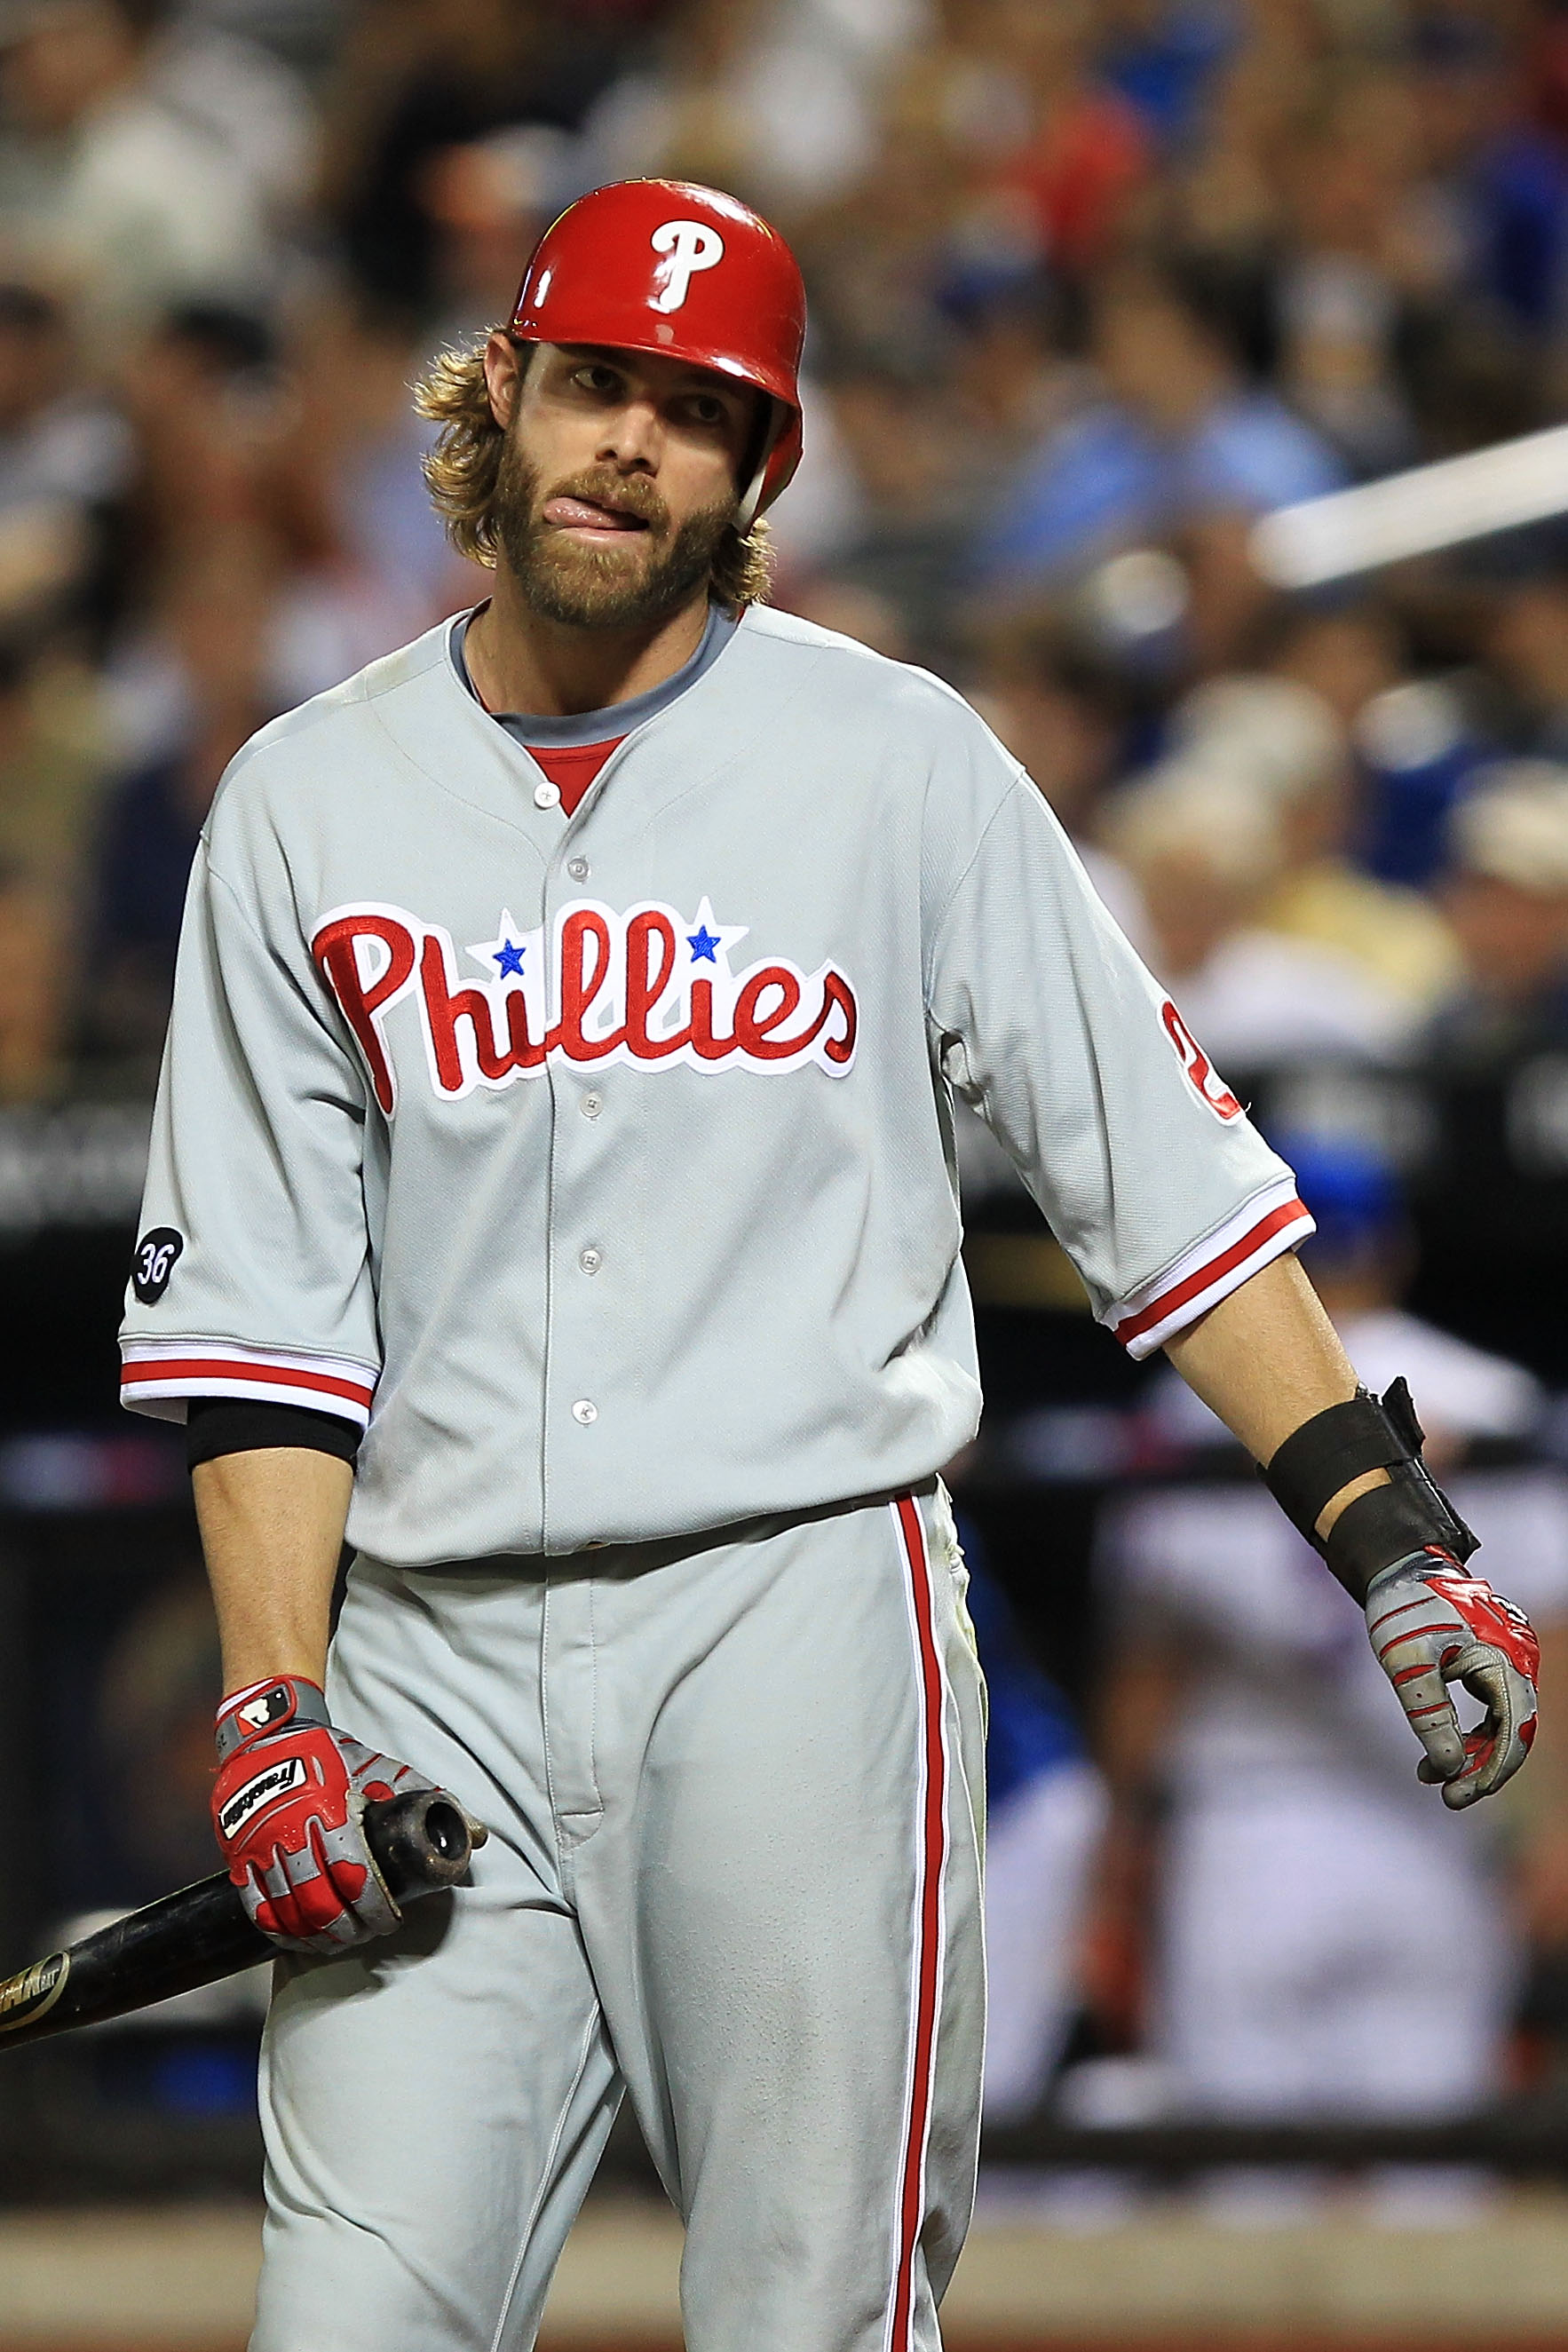 HS 197: Jayson Werth deserves to be on the Phillies Wall of Fame - The Good  Phight